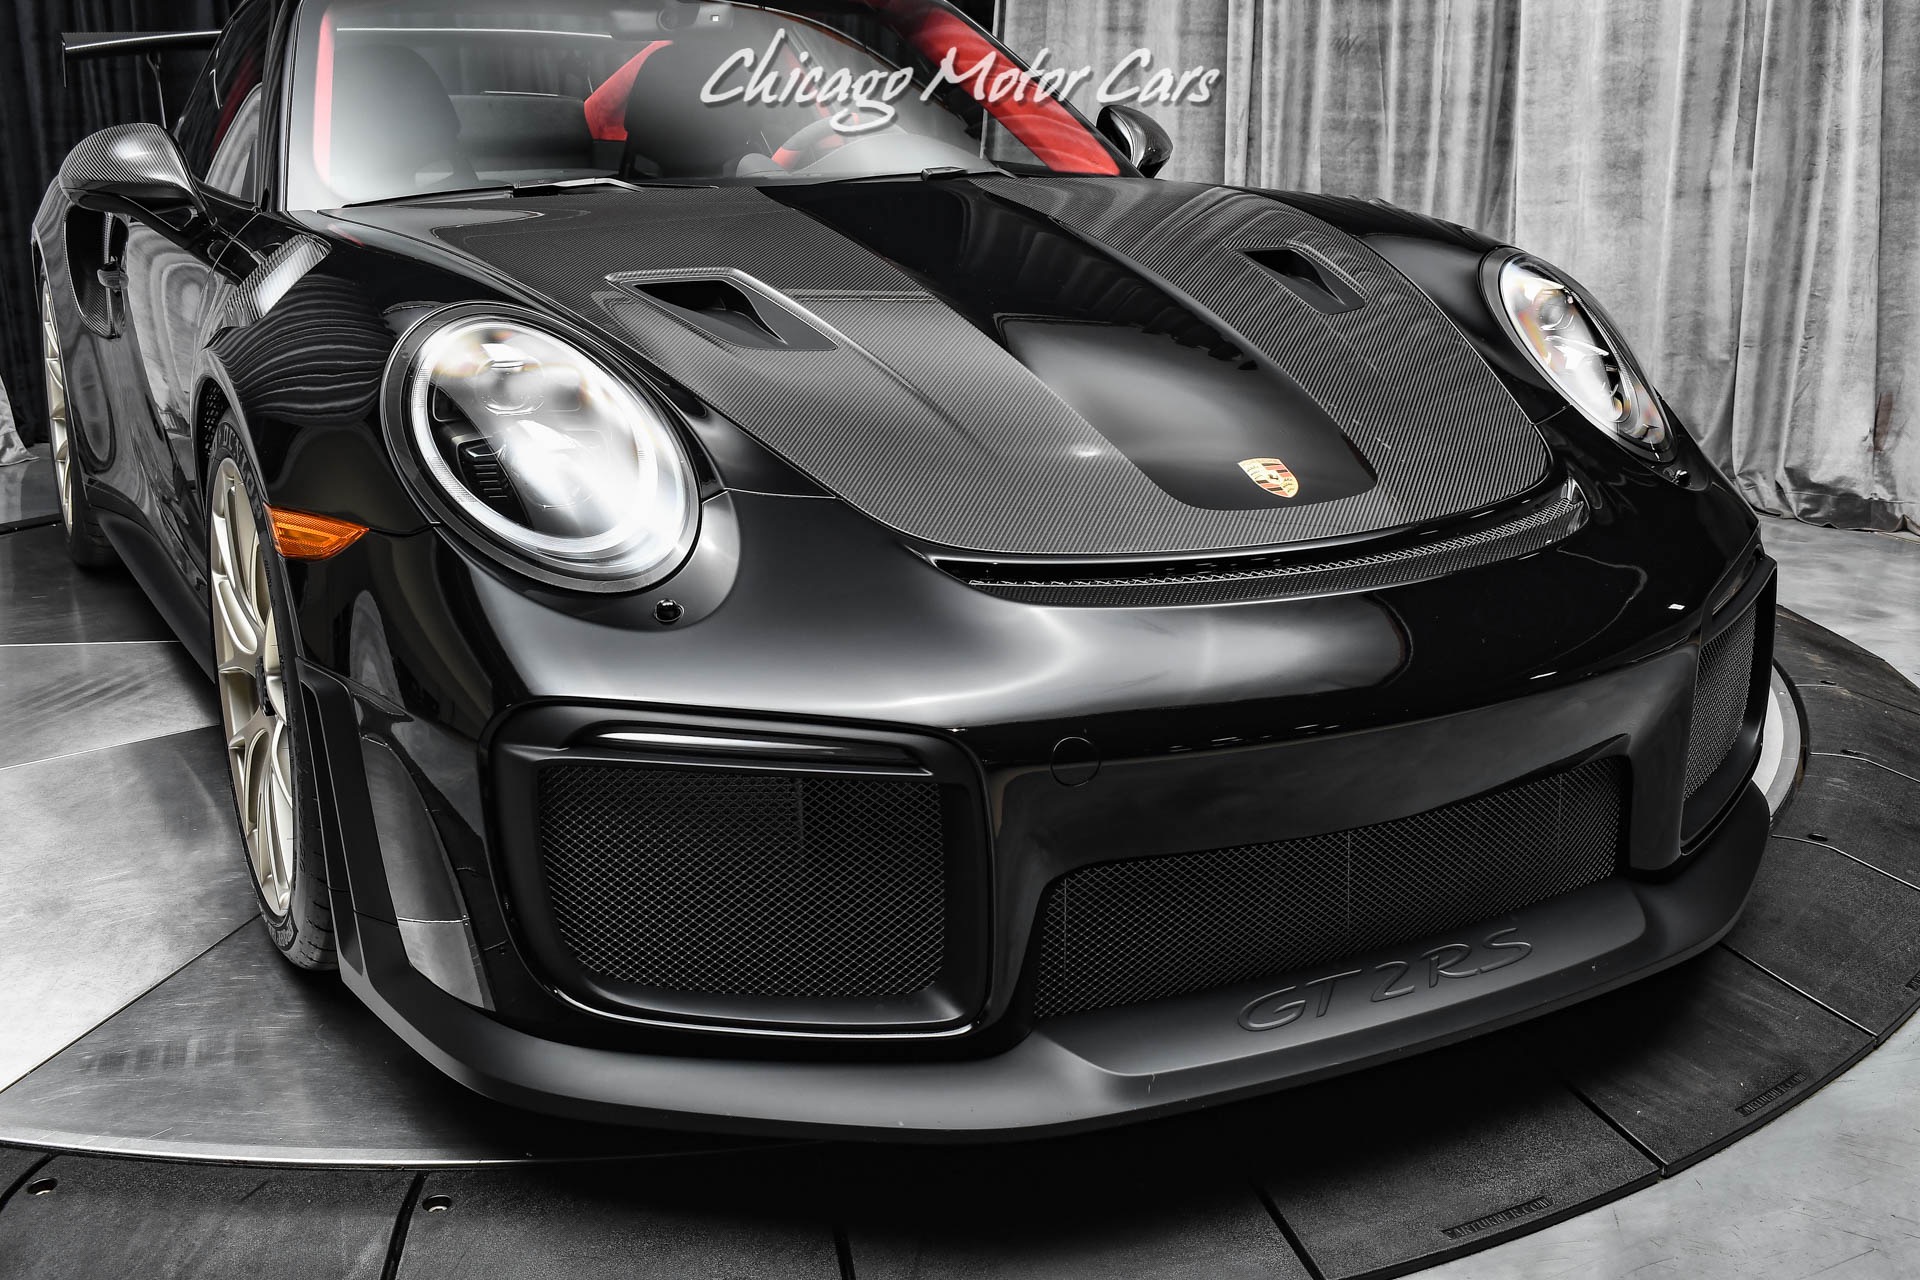 Used-2018-Porsche-911-GT2-RS-Weissach-Package-Magnesium-Wheels-Only-766-Miles-Entire-Car-PPF